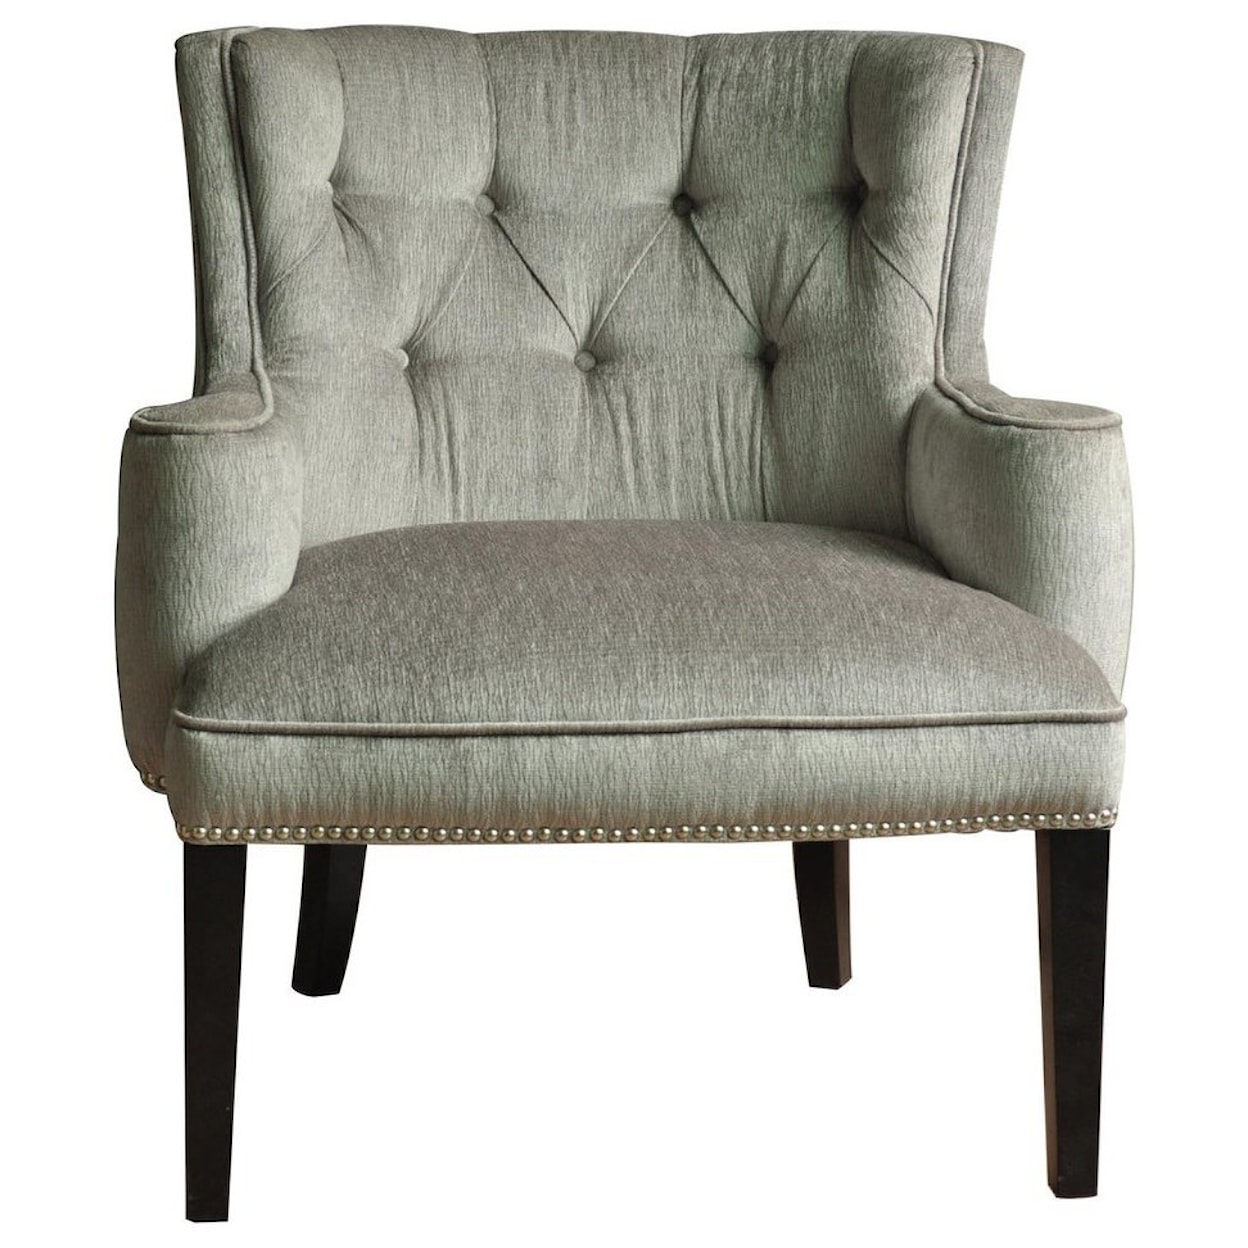 Crestview Collection Accent Furniture Fifth Ave Textured Silver Nailhead Chair